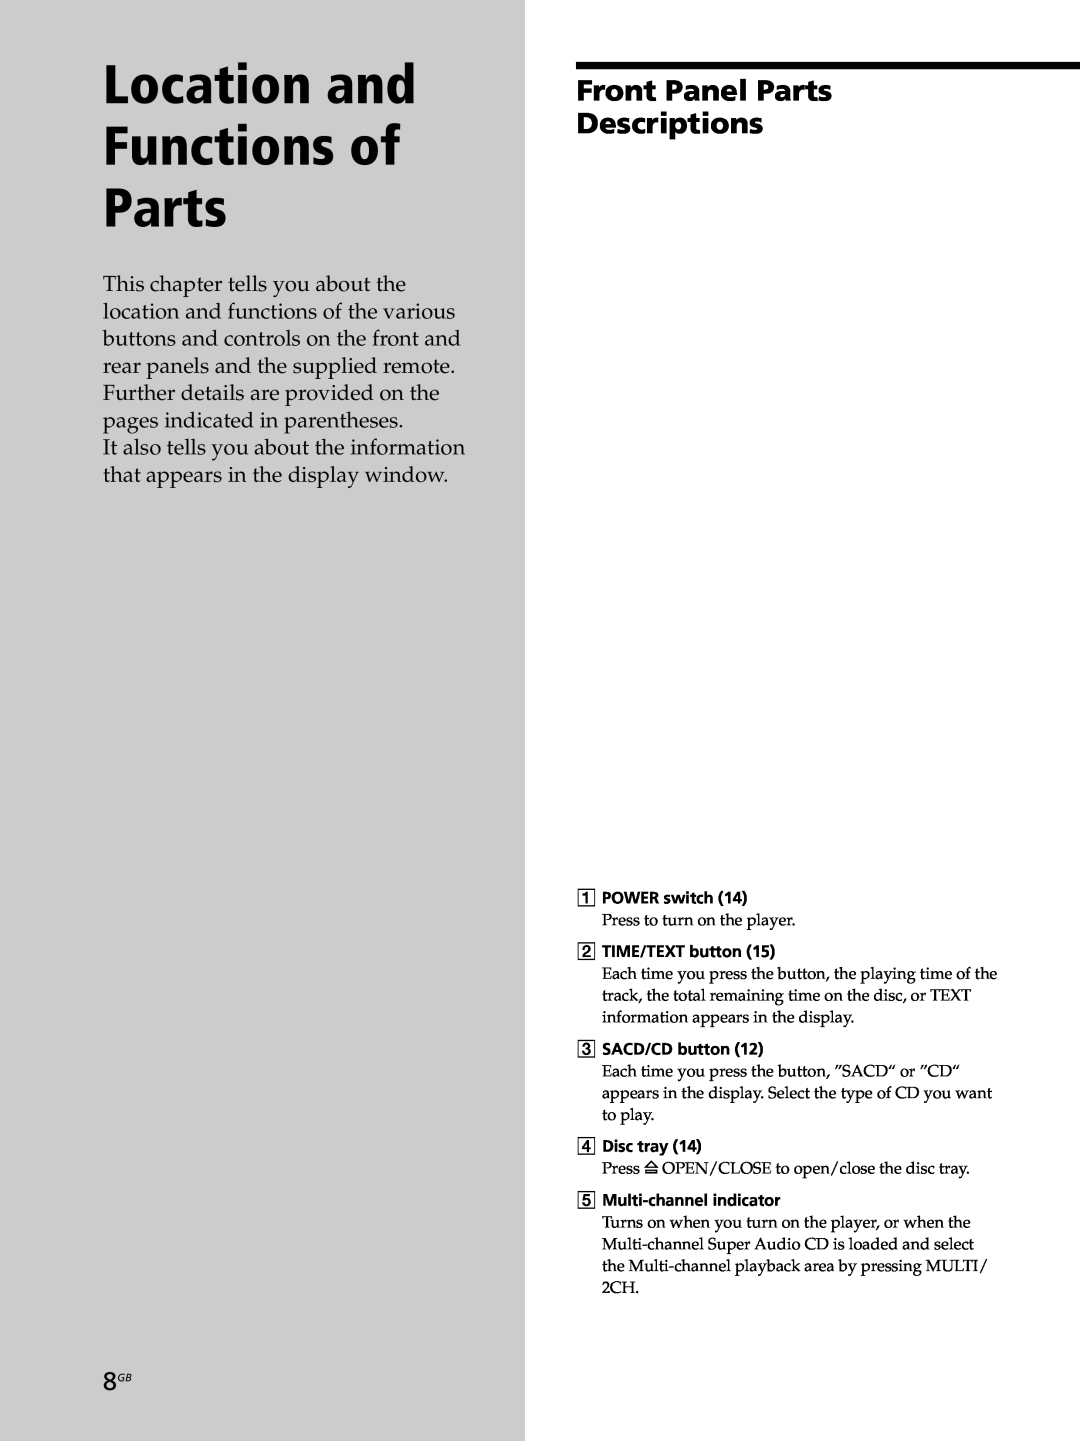 Sony SCD-XB770 operating instructions Location and Functions of Parts, Front Panel Parts Descriptions 